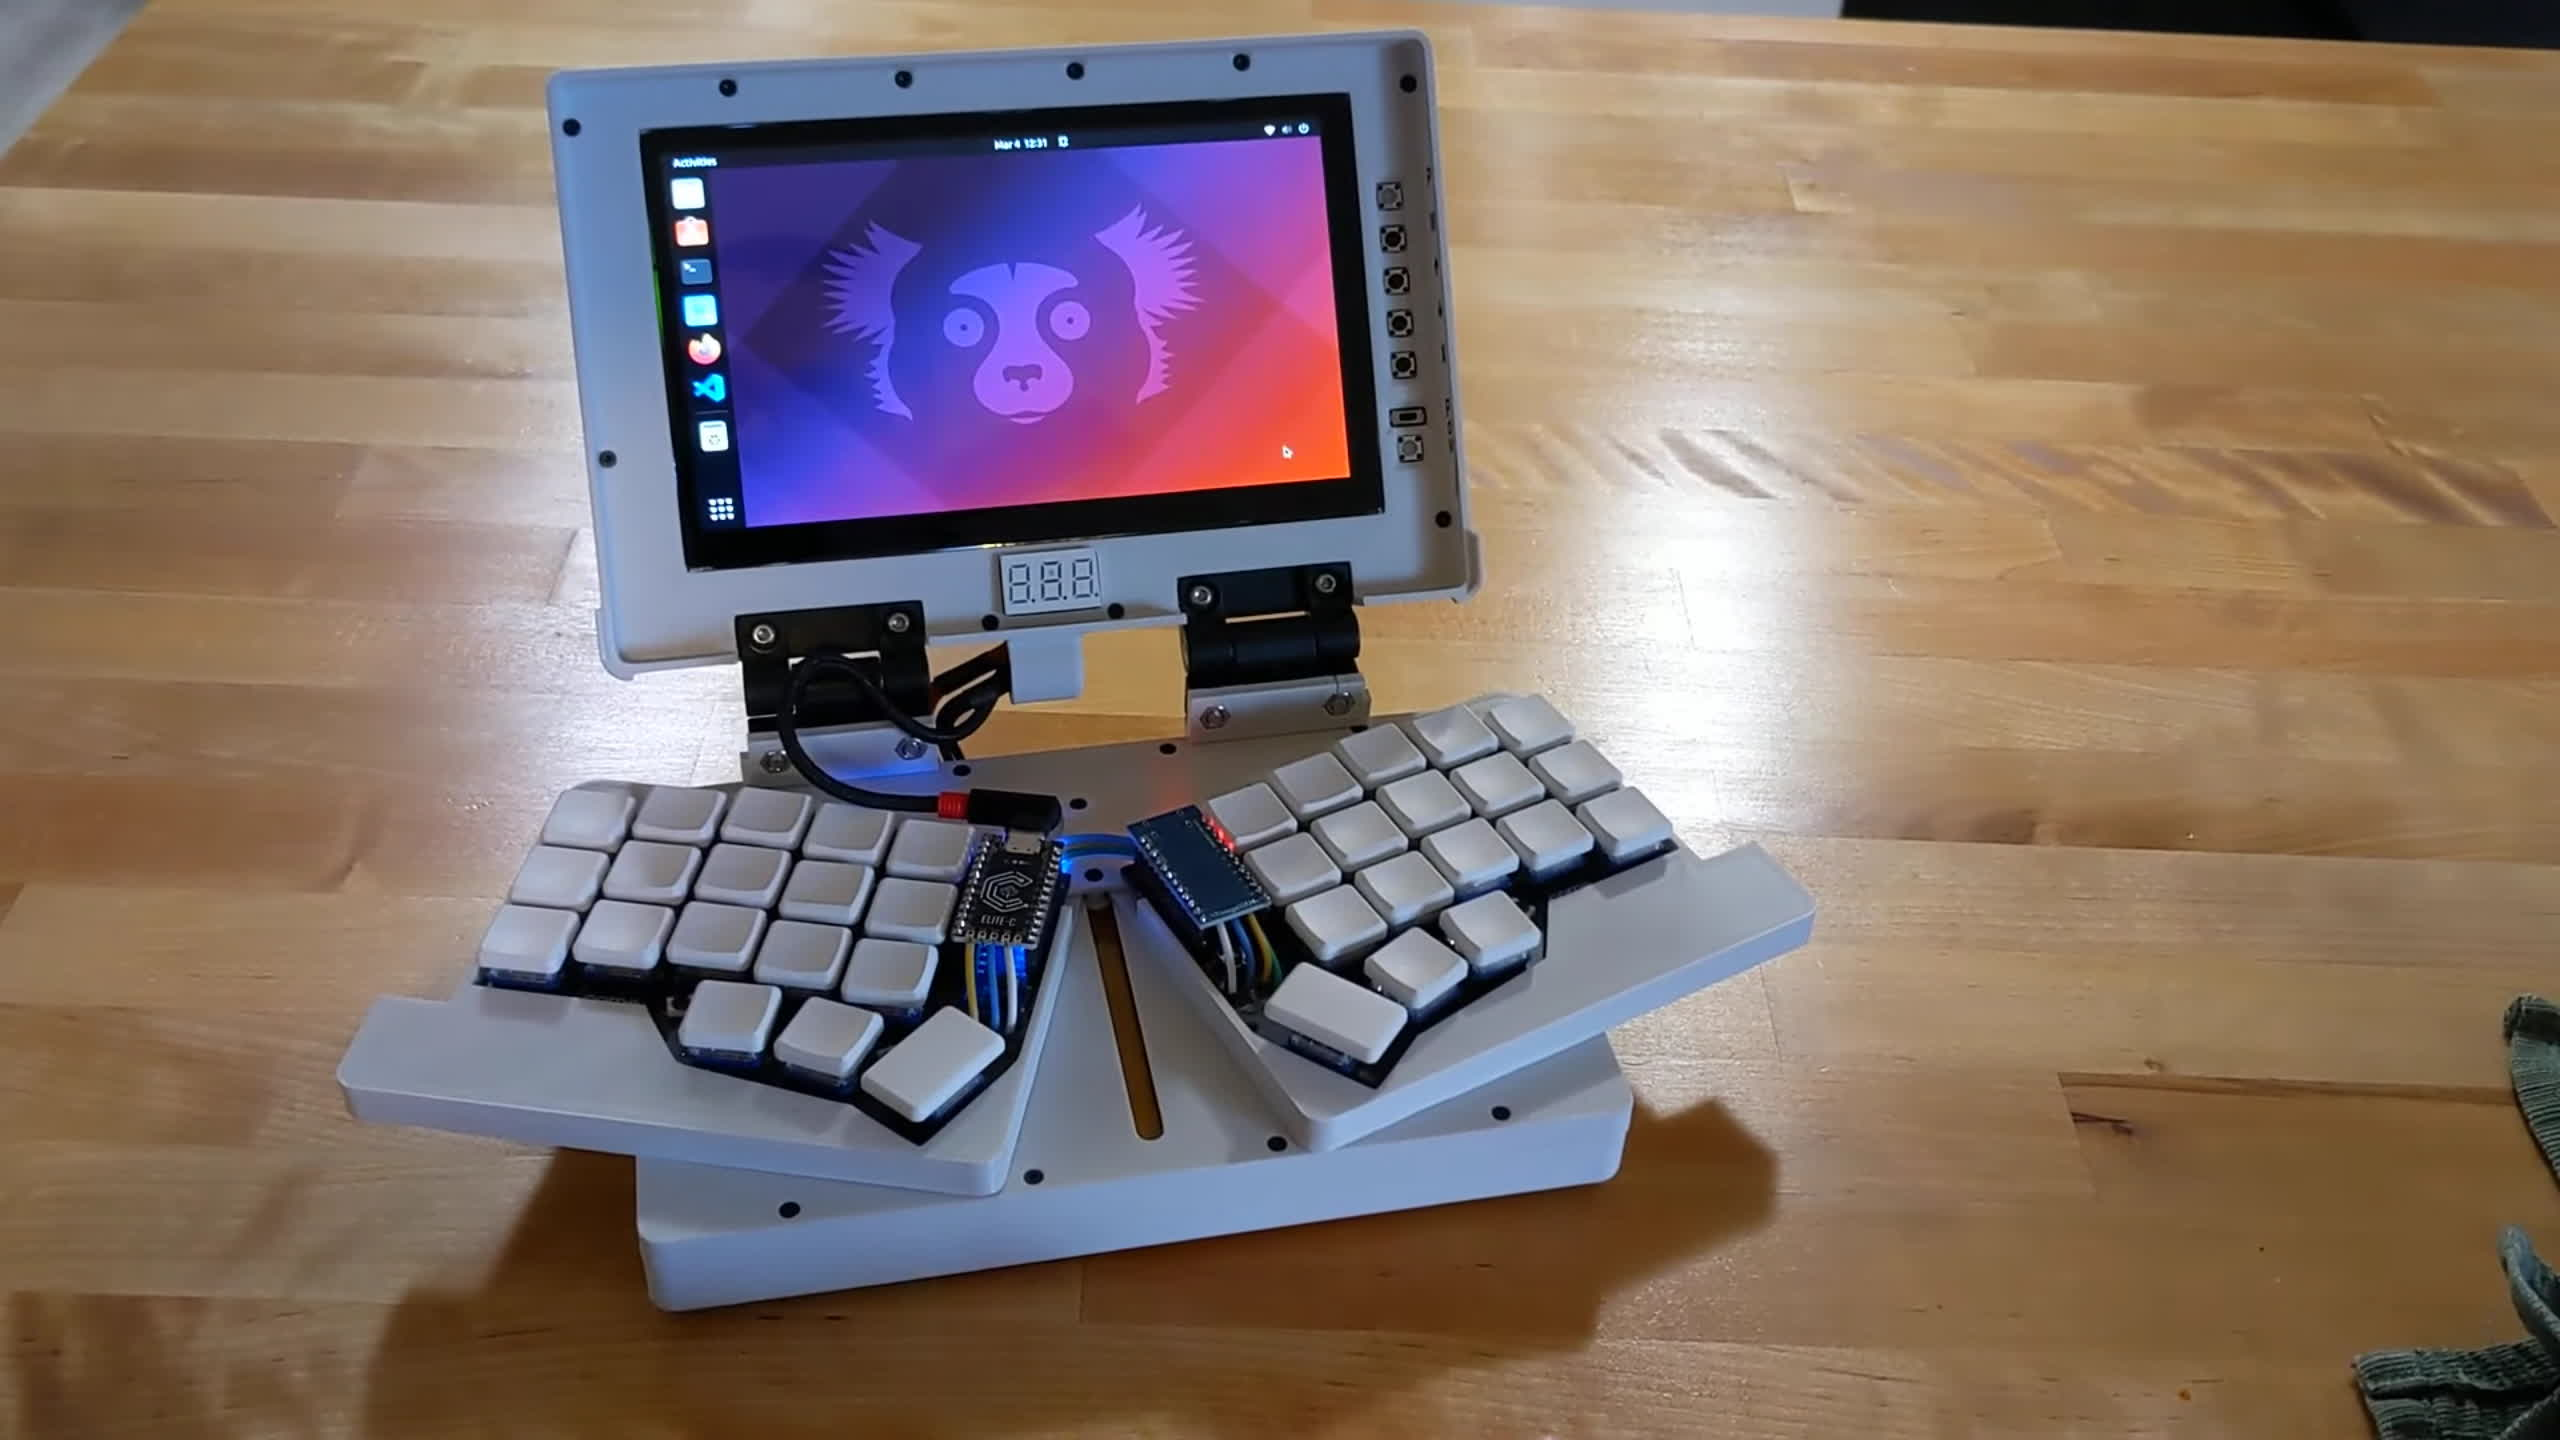 The Pi-based Chonky Palmtop is a PC